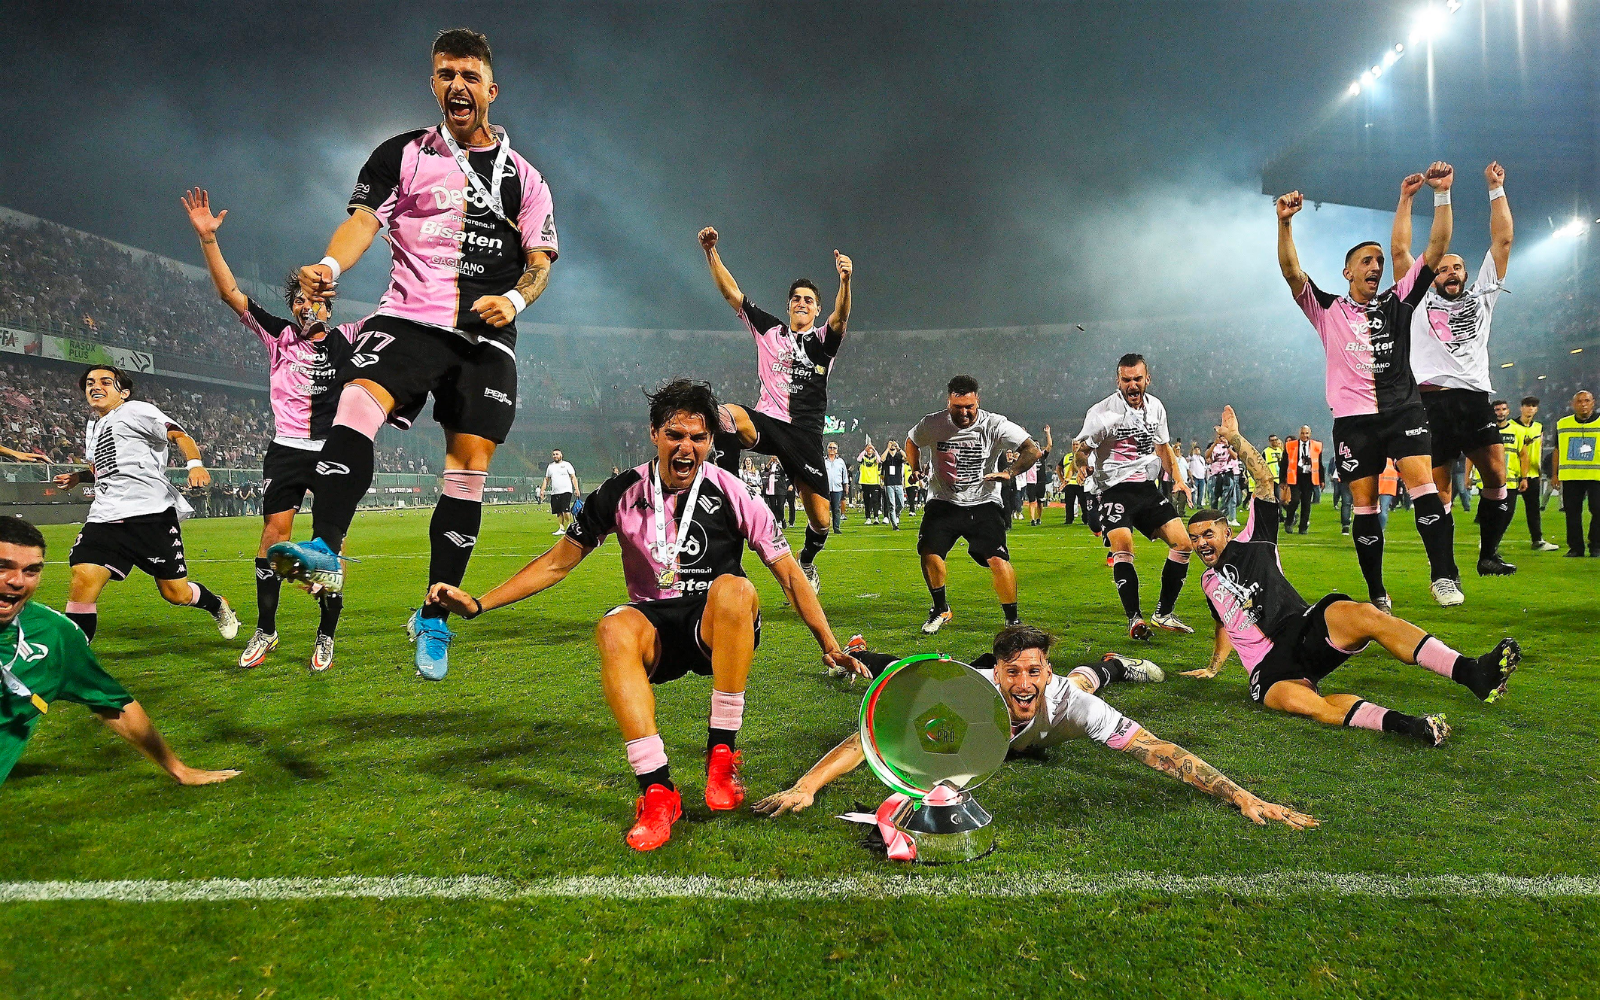 Old Wild West new Main Sponsor of Palermo Fc - Palermo F.C.